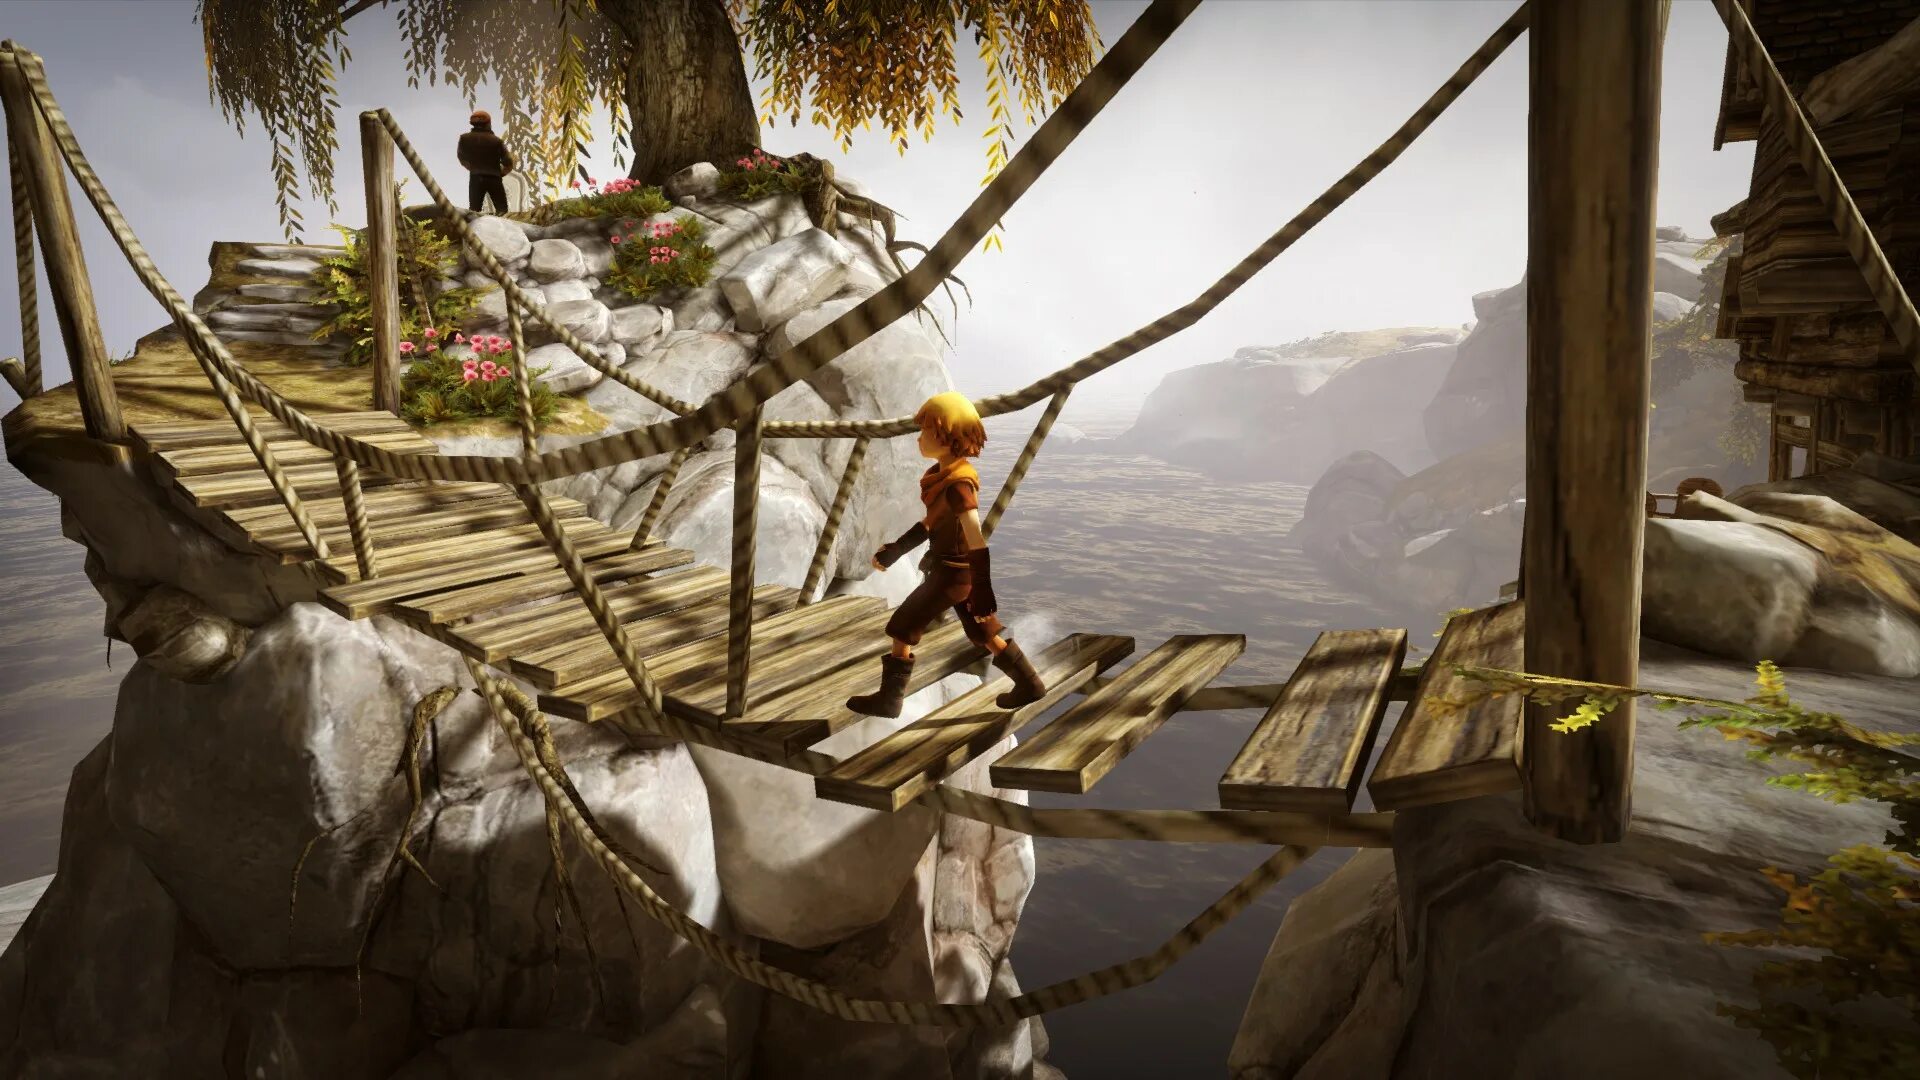 Two brothers ps4. Brothers: a Tale of two sons. Two brothers a Tale of two sons. Brothers: a Tale of two sons (2013). Brothers игра.